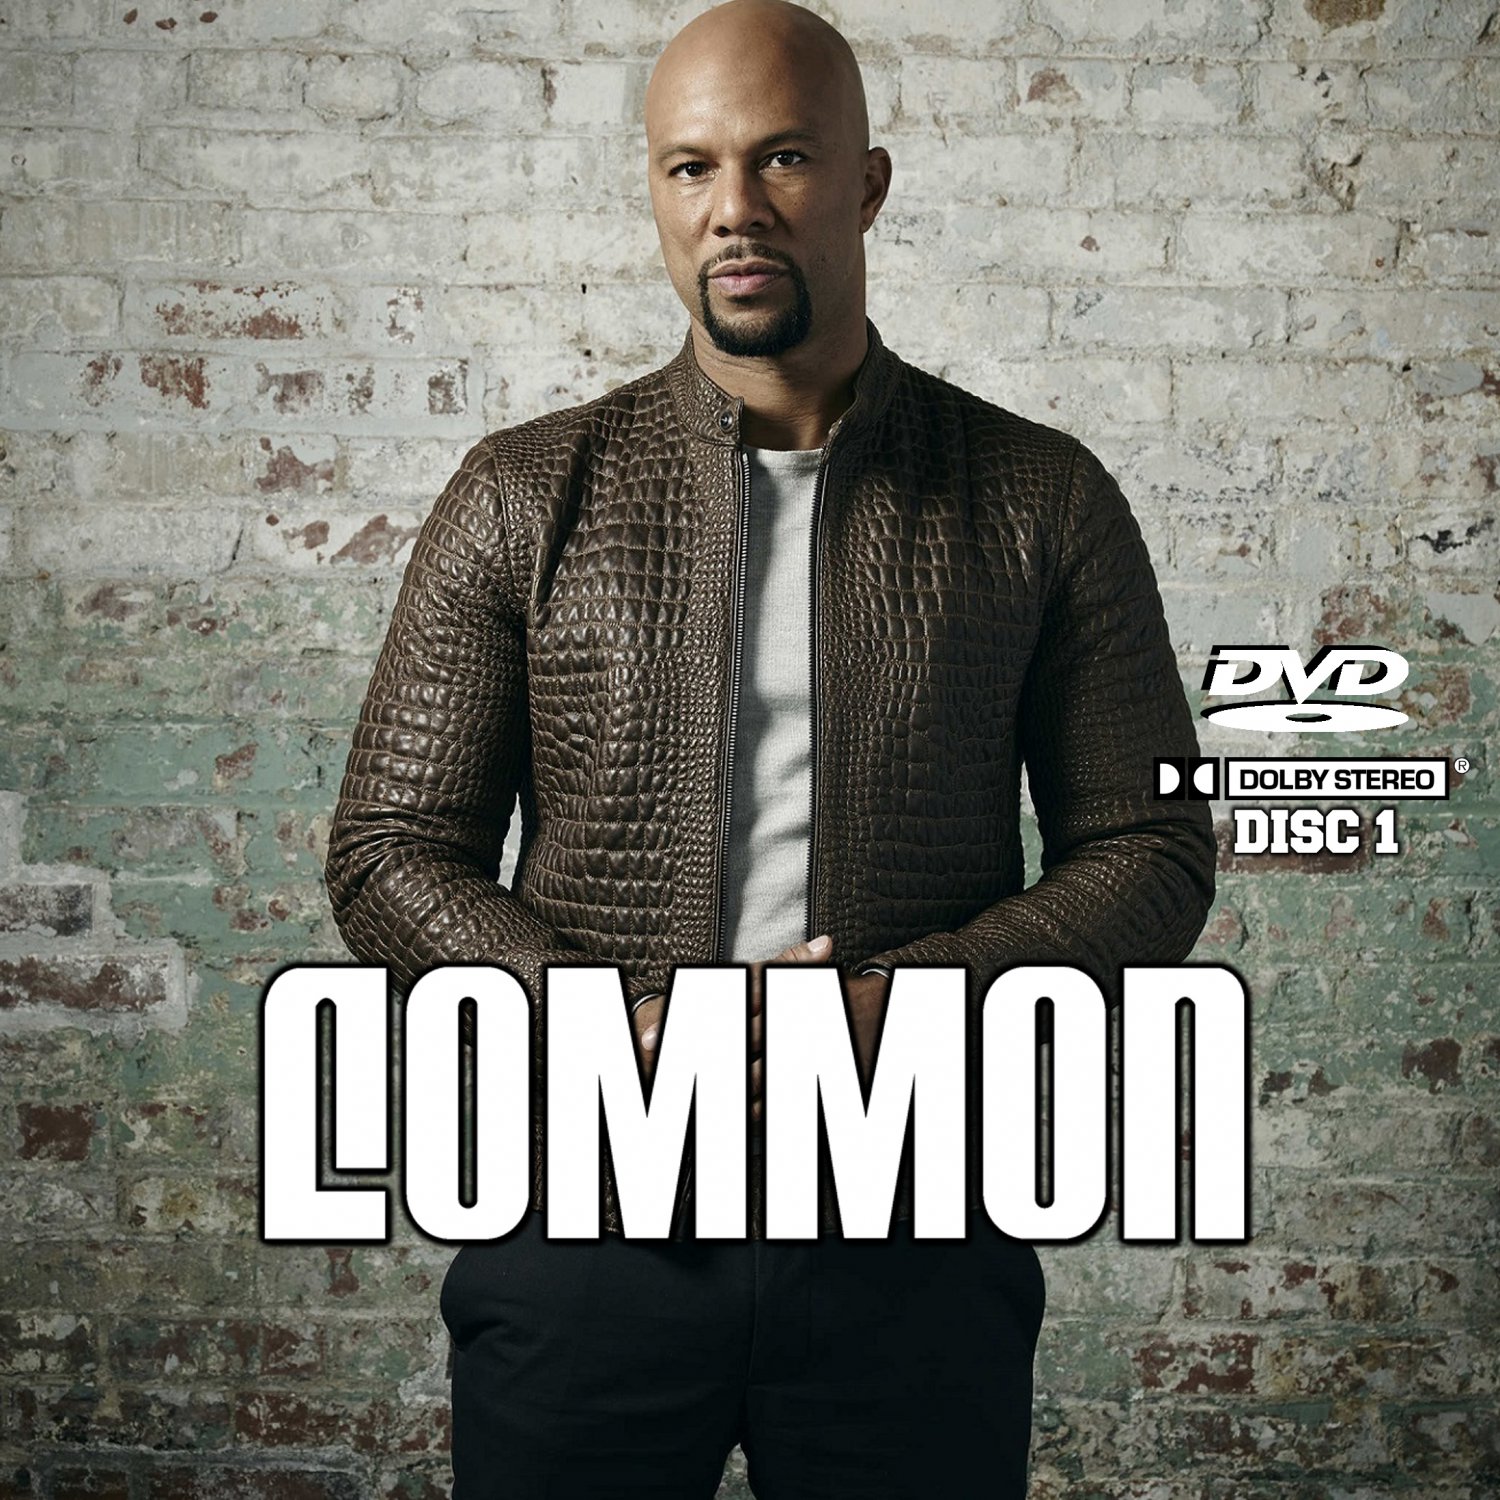 common ft lauryn hill retrospect for life